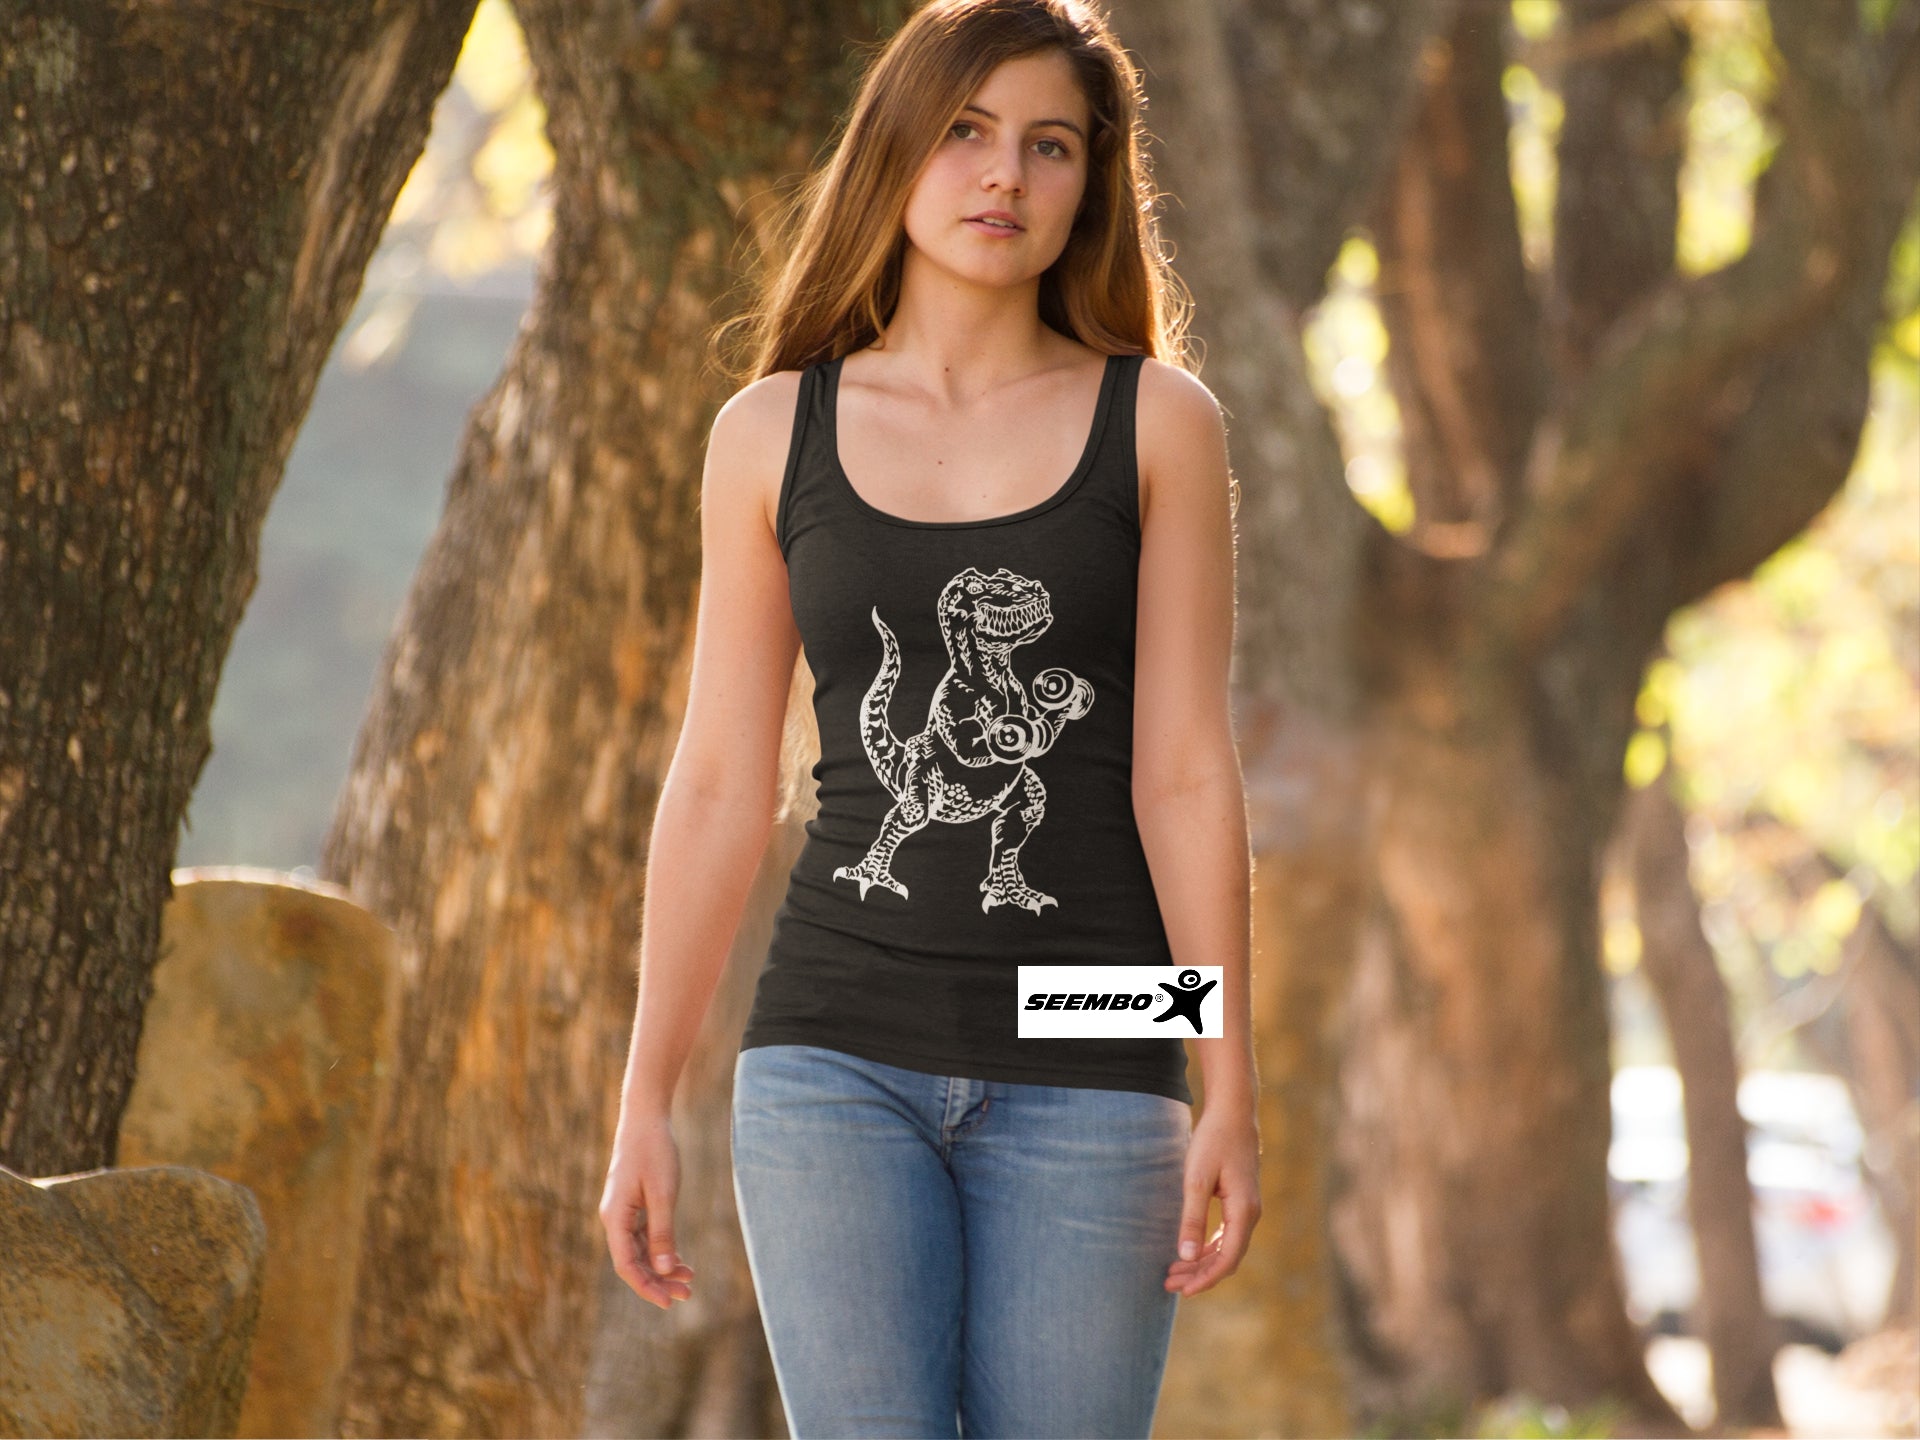 seembo-dinosaur-weight-lifting-a-pair-of-dumbbells-black-tank-top-women-girl-at-the-forest